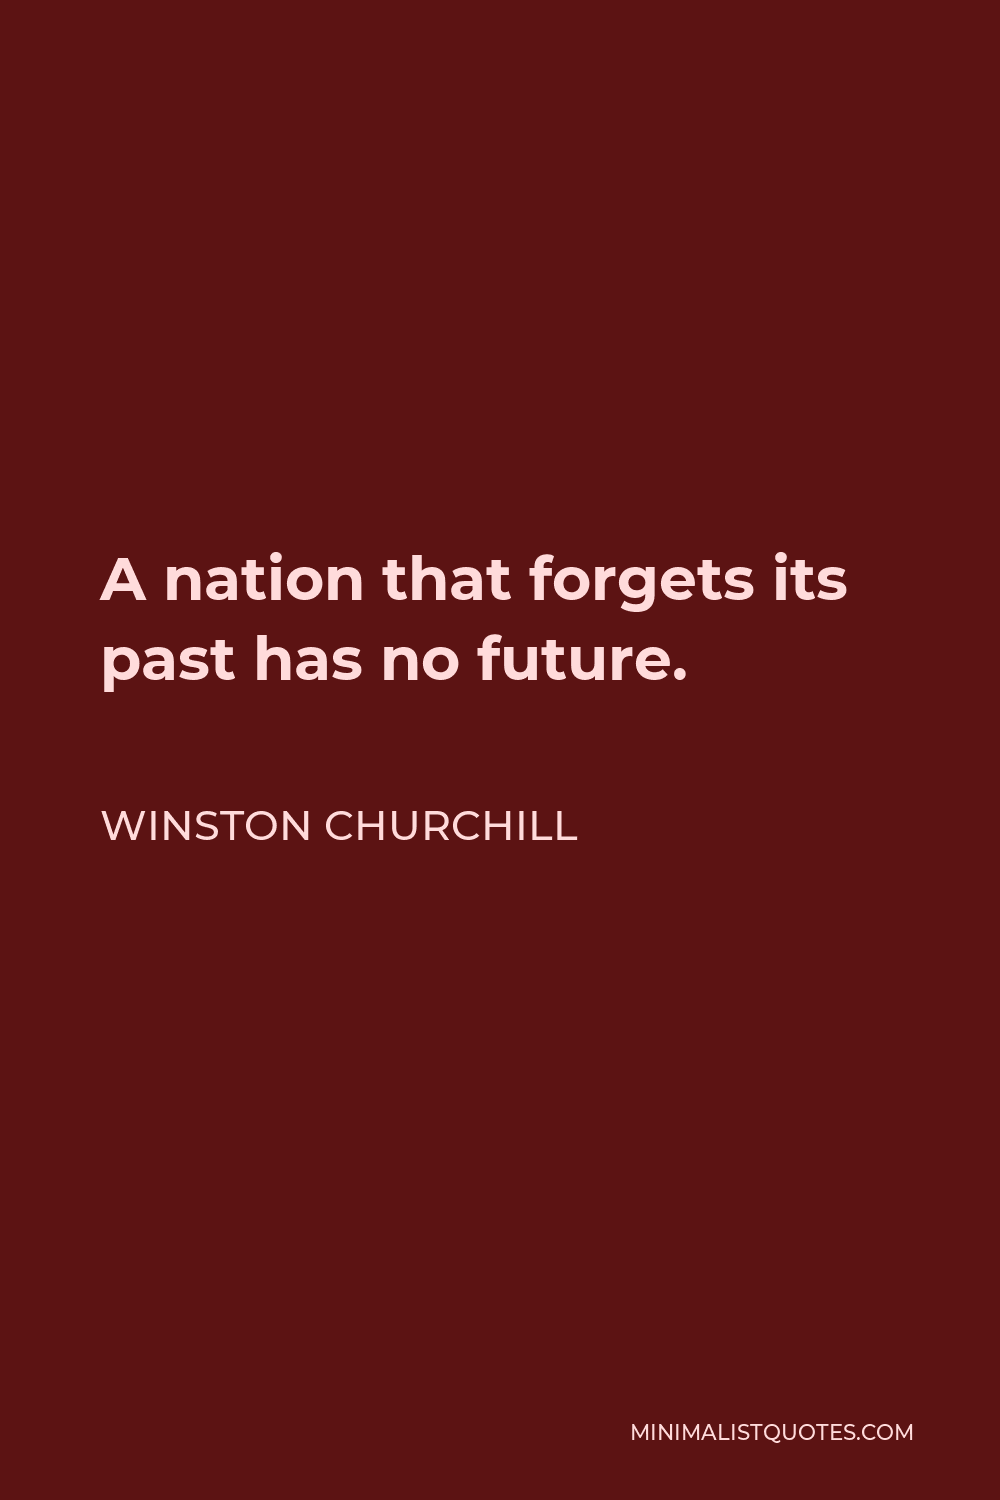 Winston Churchill Quote - A nation that forgets its past has no future.